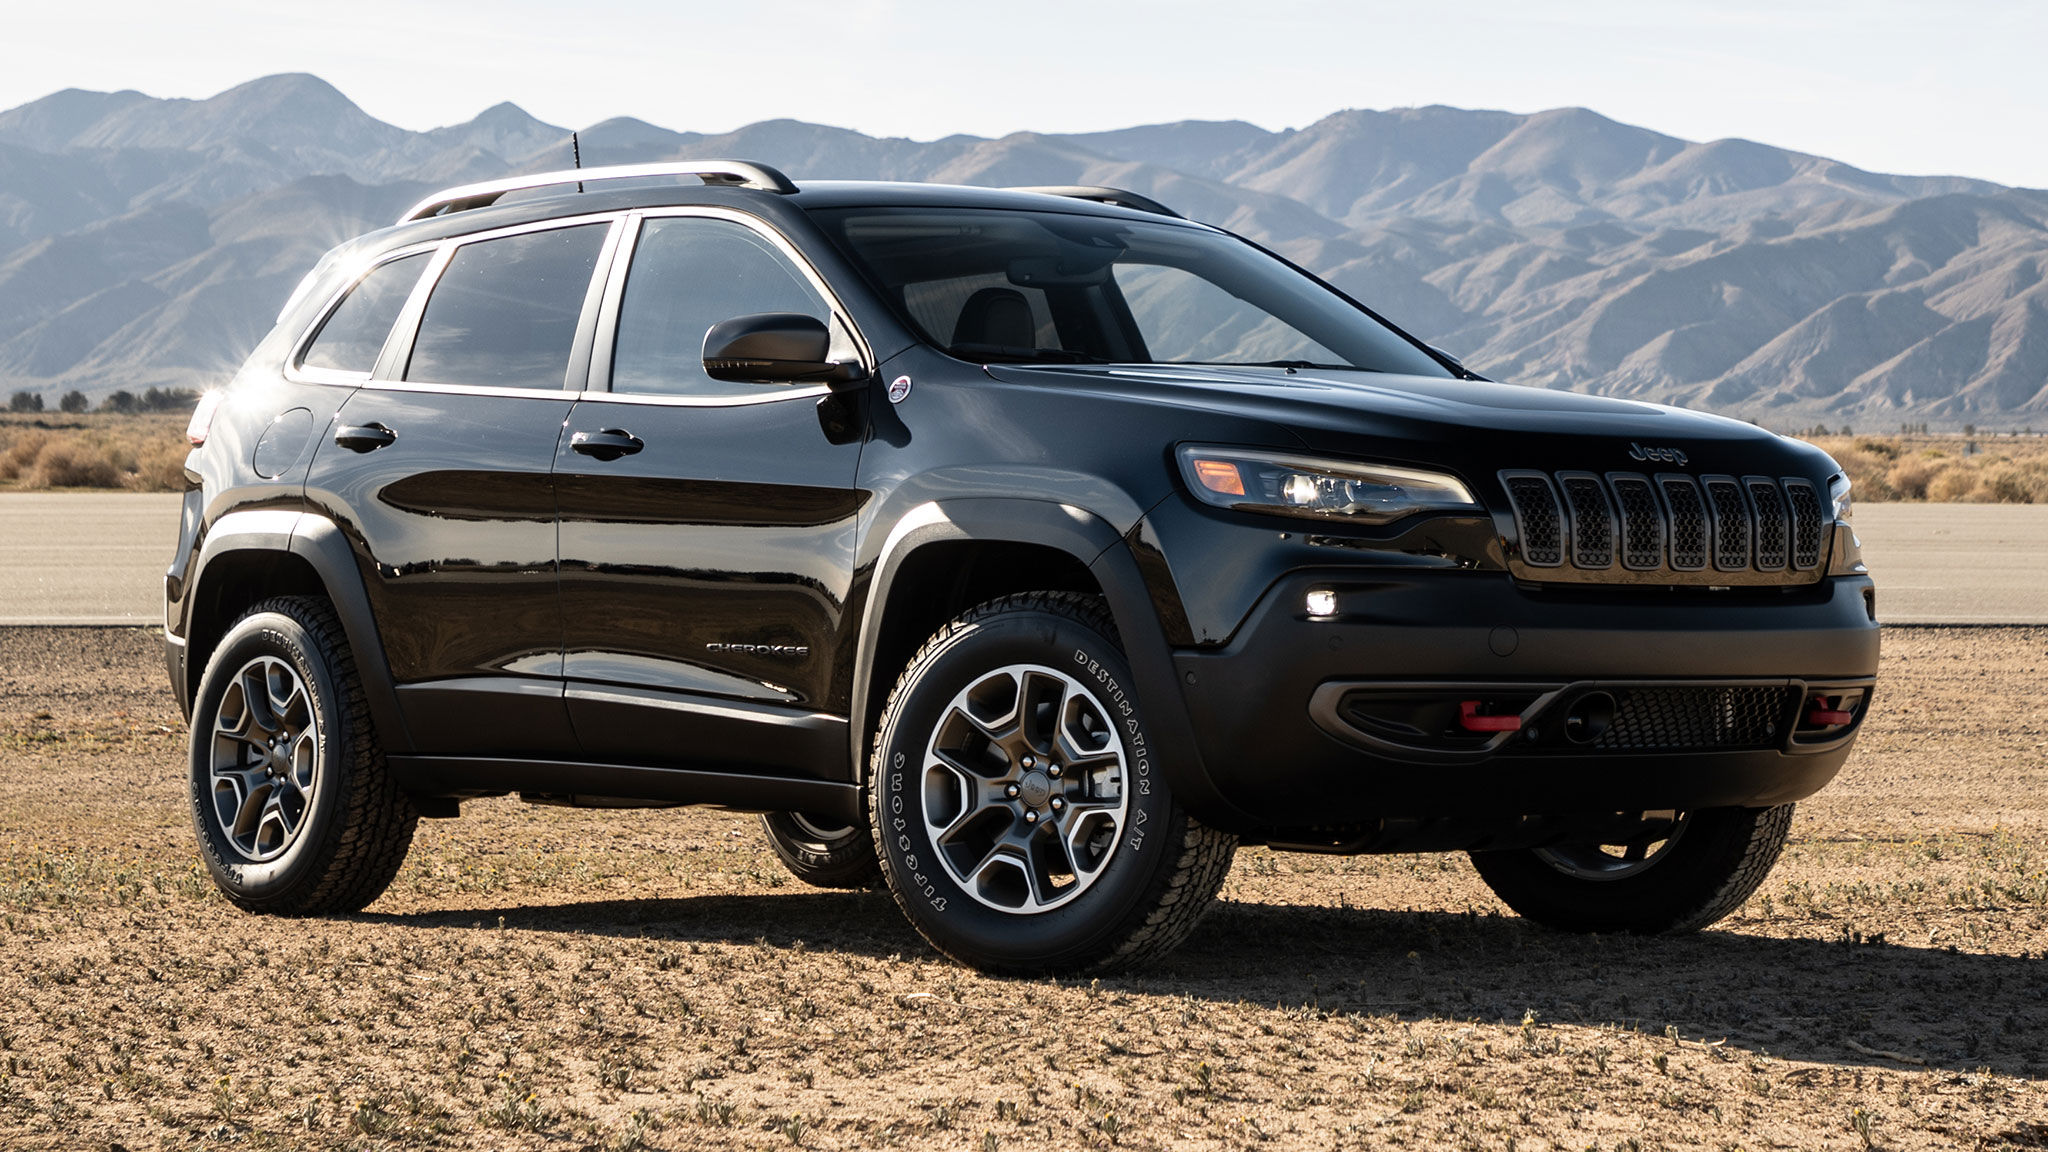 Tons of Terrific Features Inside the 2021 Jeep® Cherokee – Jeff D'Ambrosio  Chrysler Jeep Dodge Blog